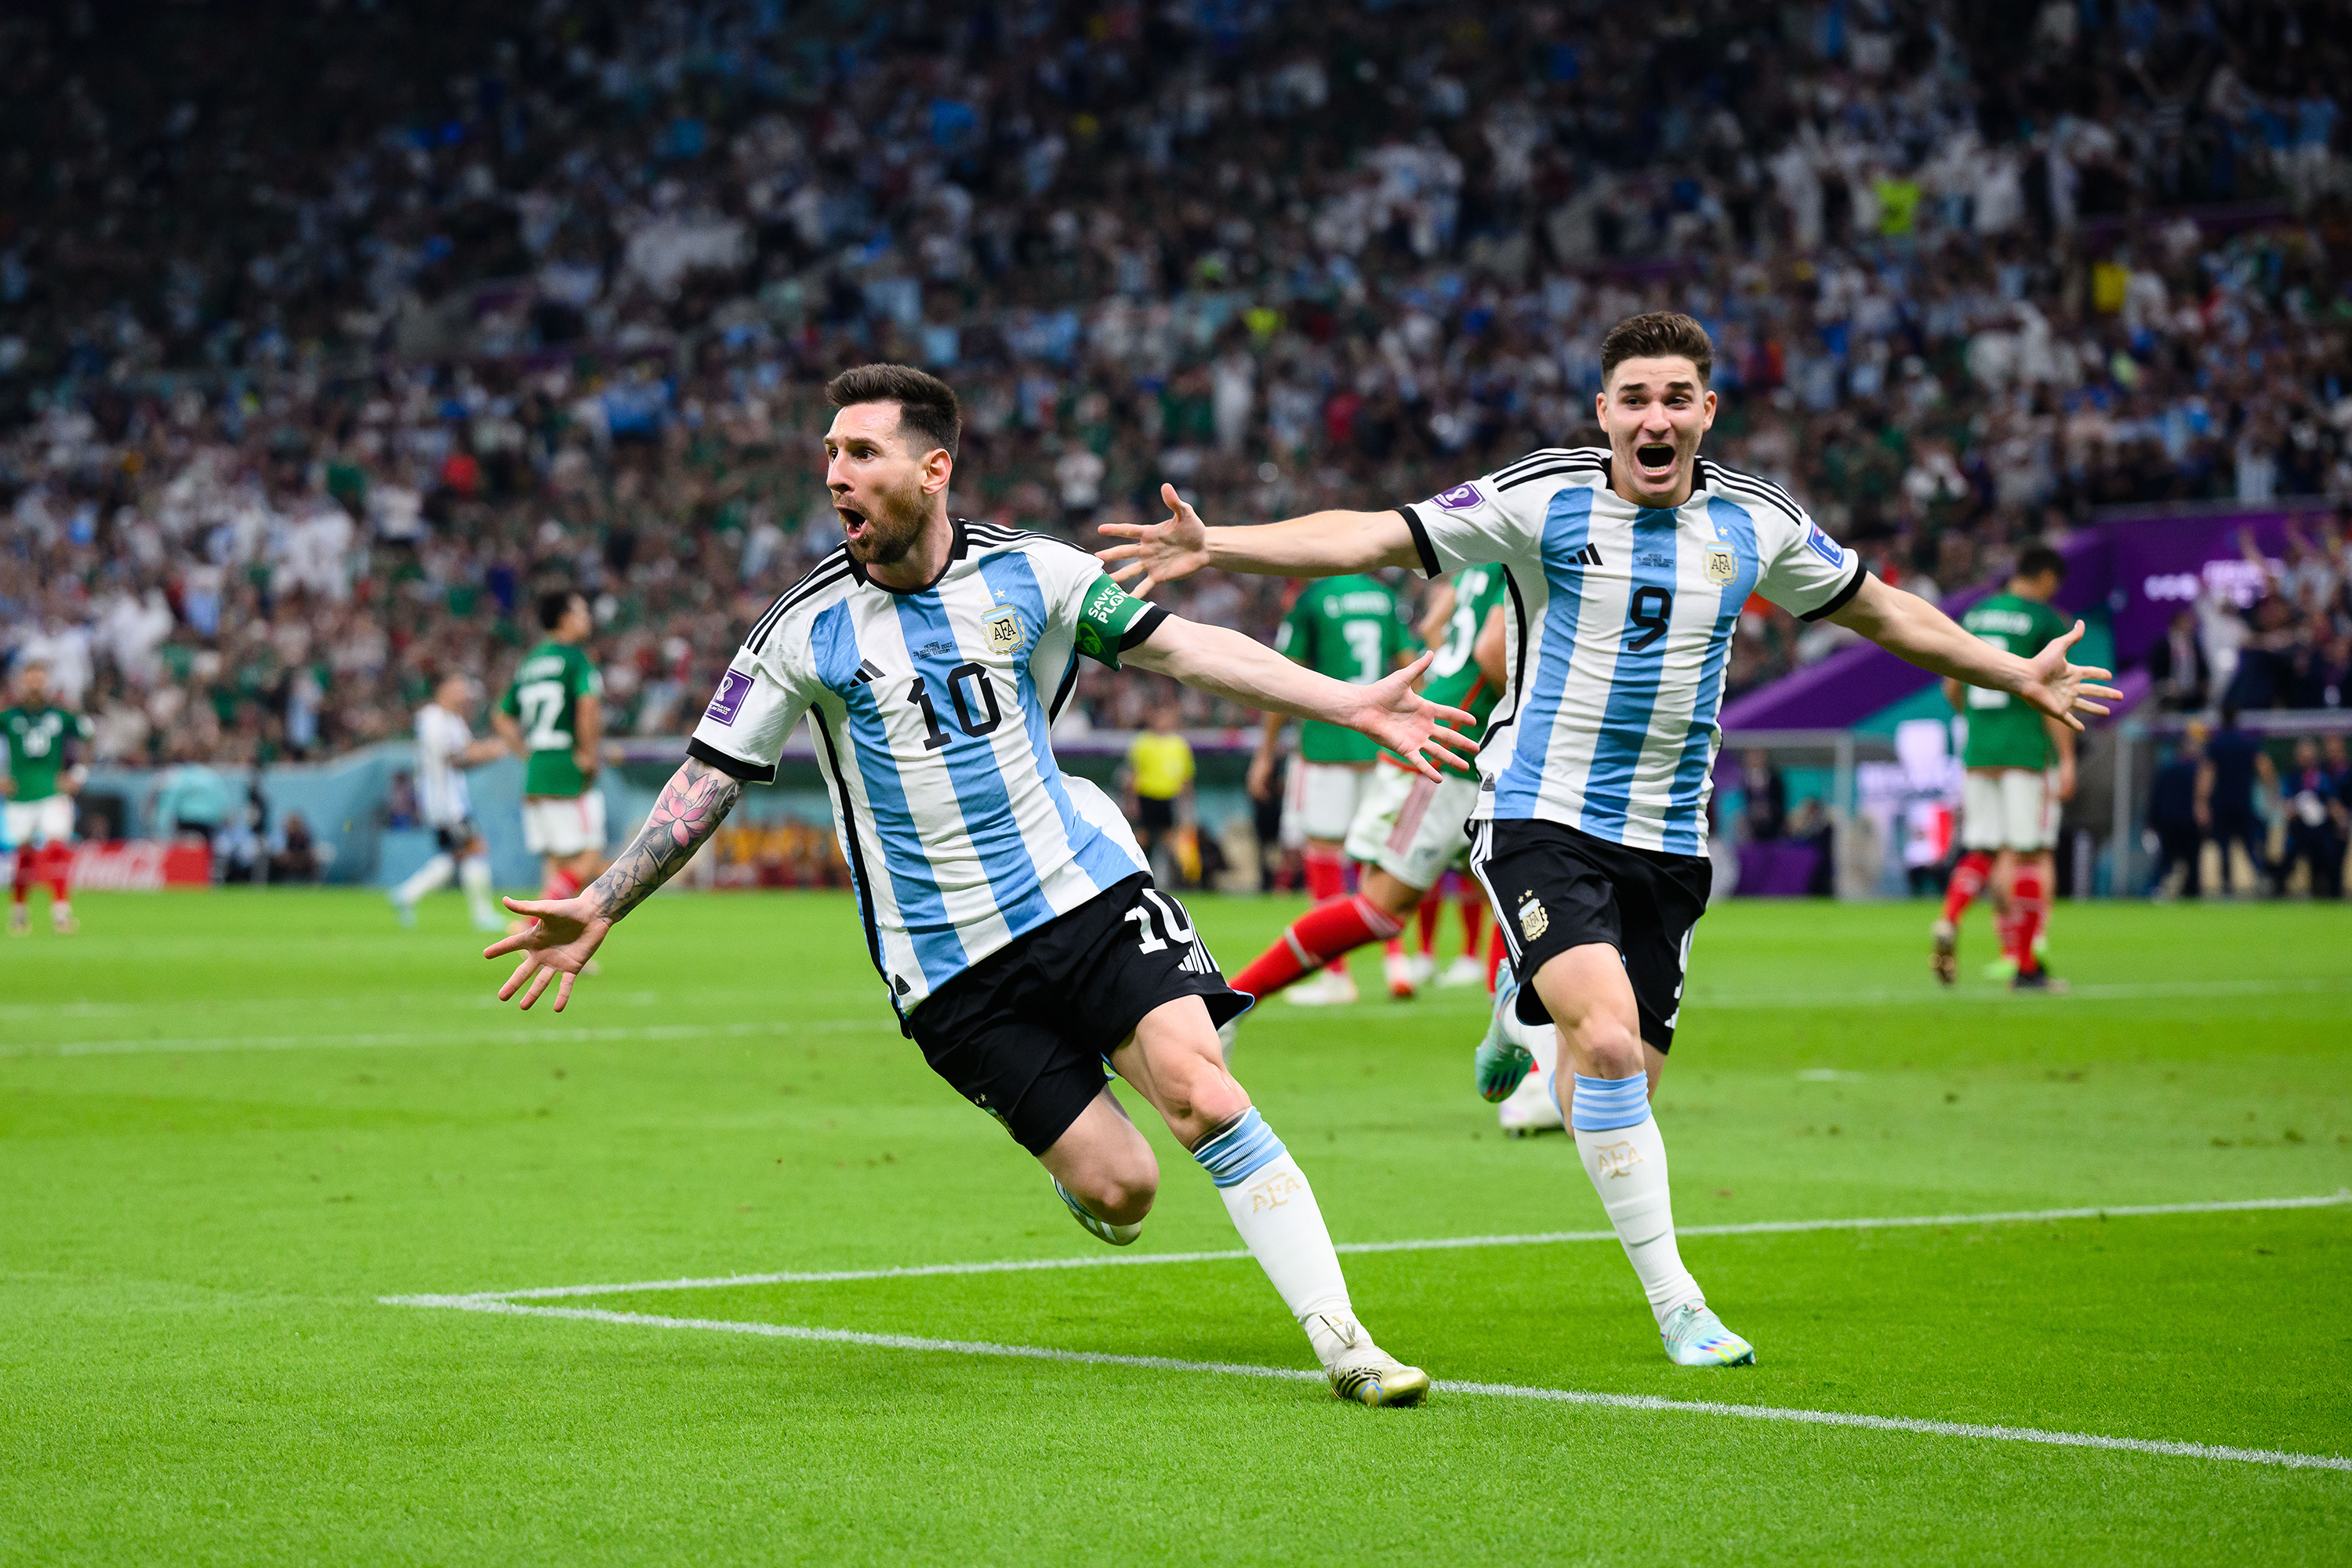 Argentina's #10 Lionel Messi celebrates scoring the opening goal during the Qatar 2022 World Cup Group C football match between Argentina and Mexico on Saturday.